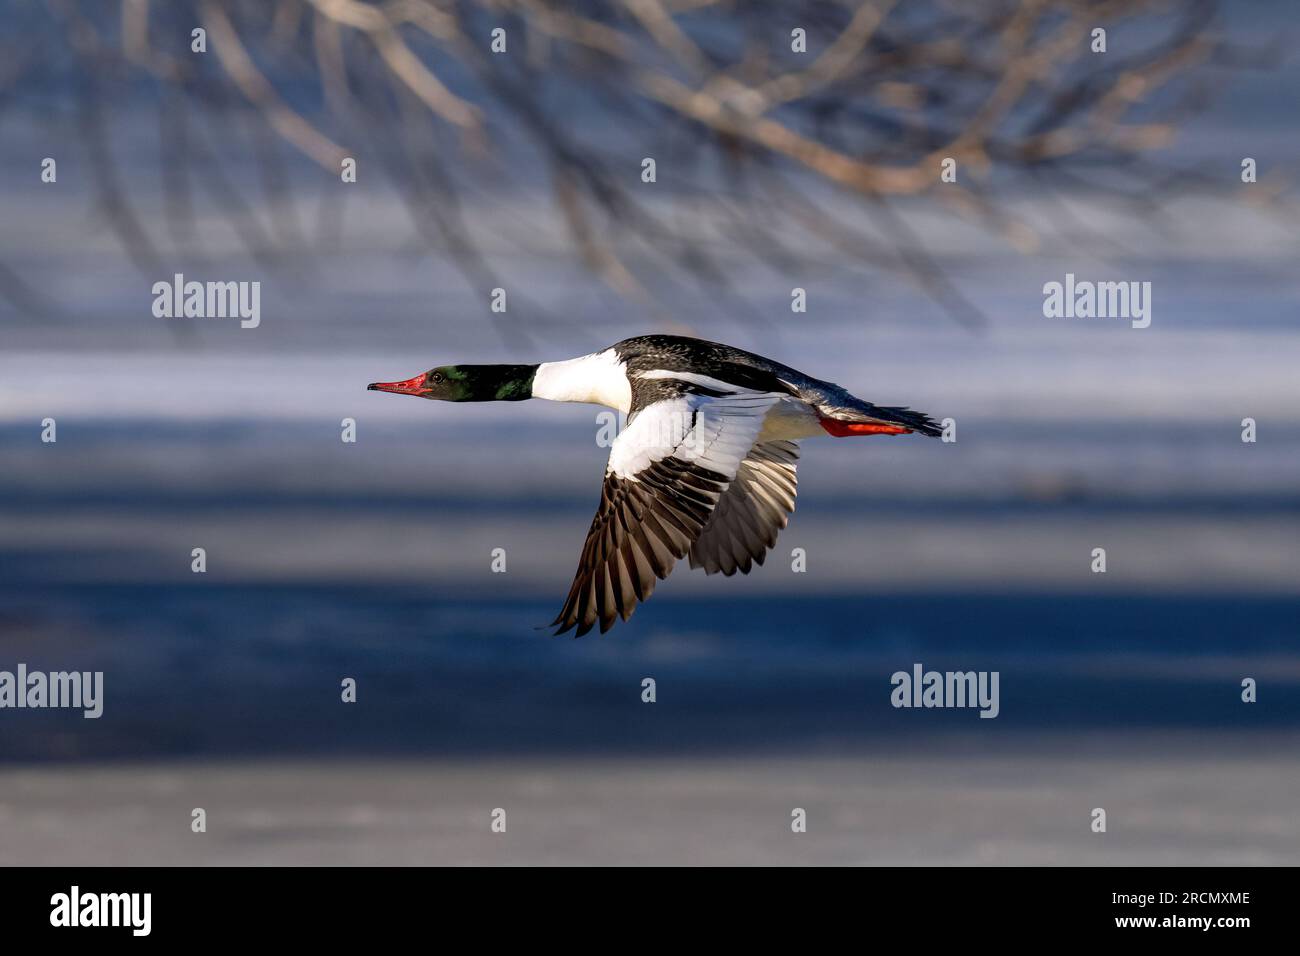 A beautiful Common Merganser duck flying by low lying branches and against a Winter Lake background. Stock Photo